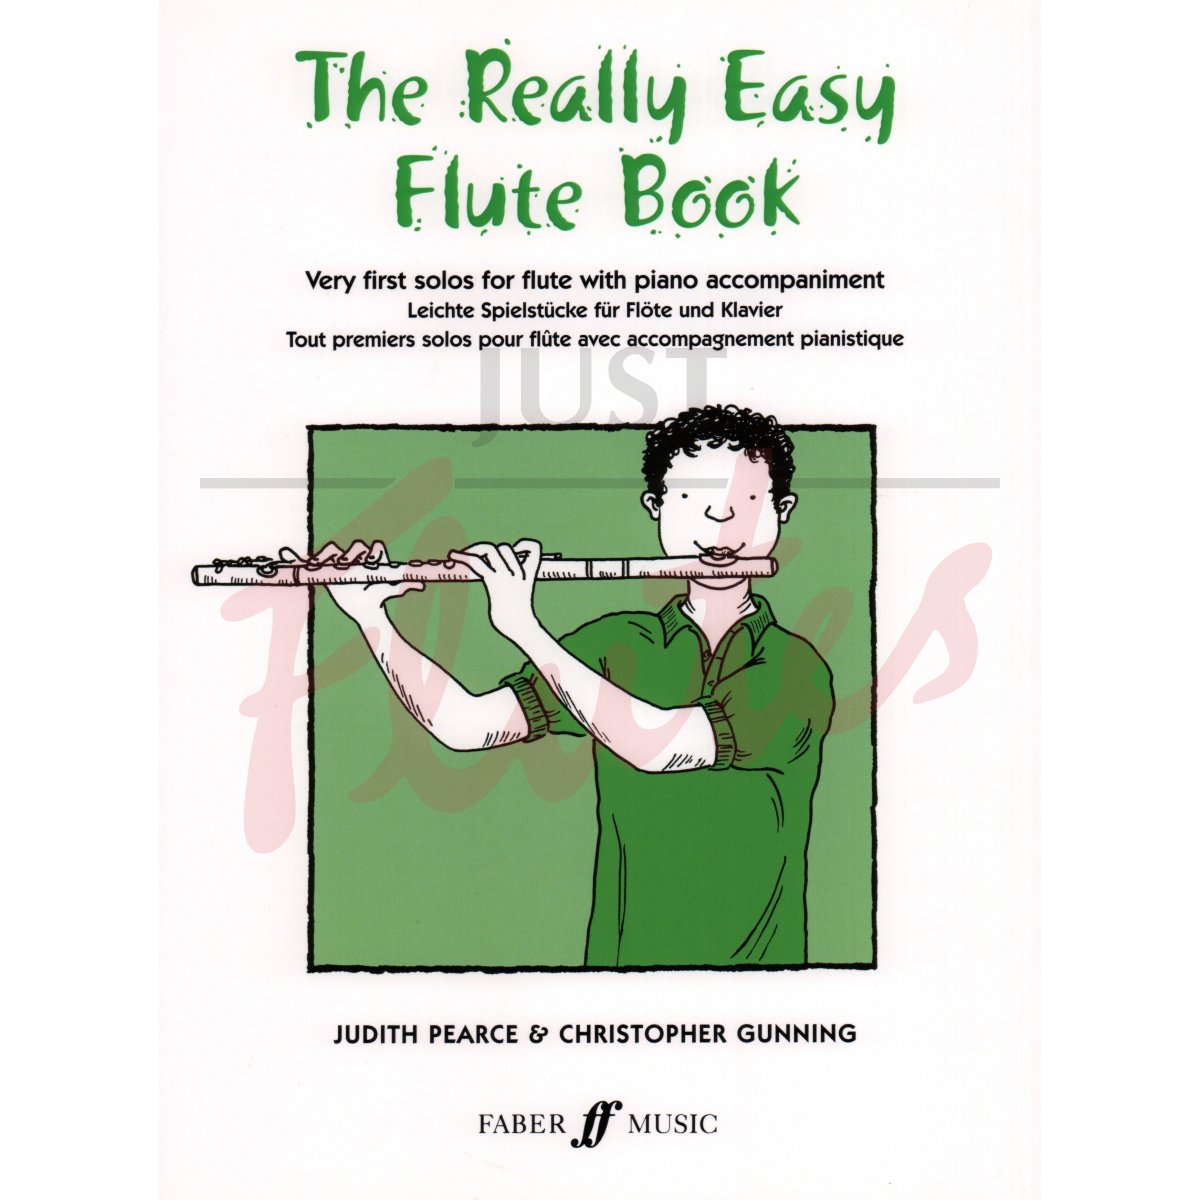 The Really Easy Flute Book